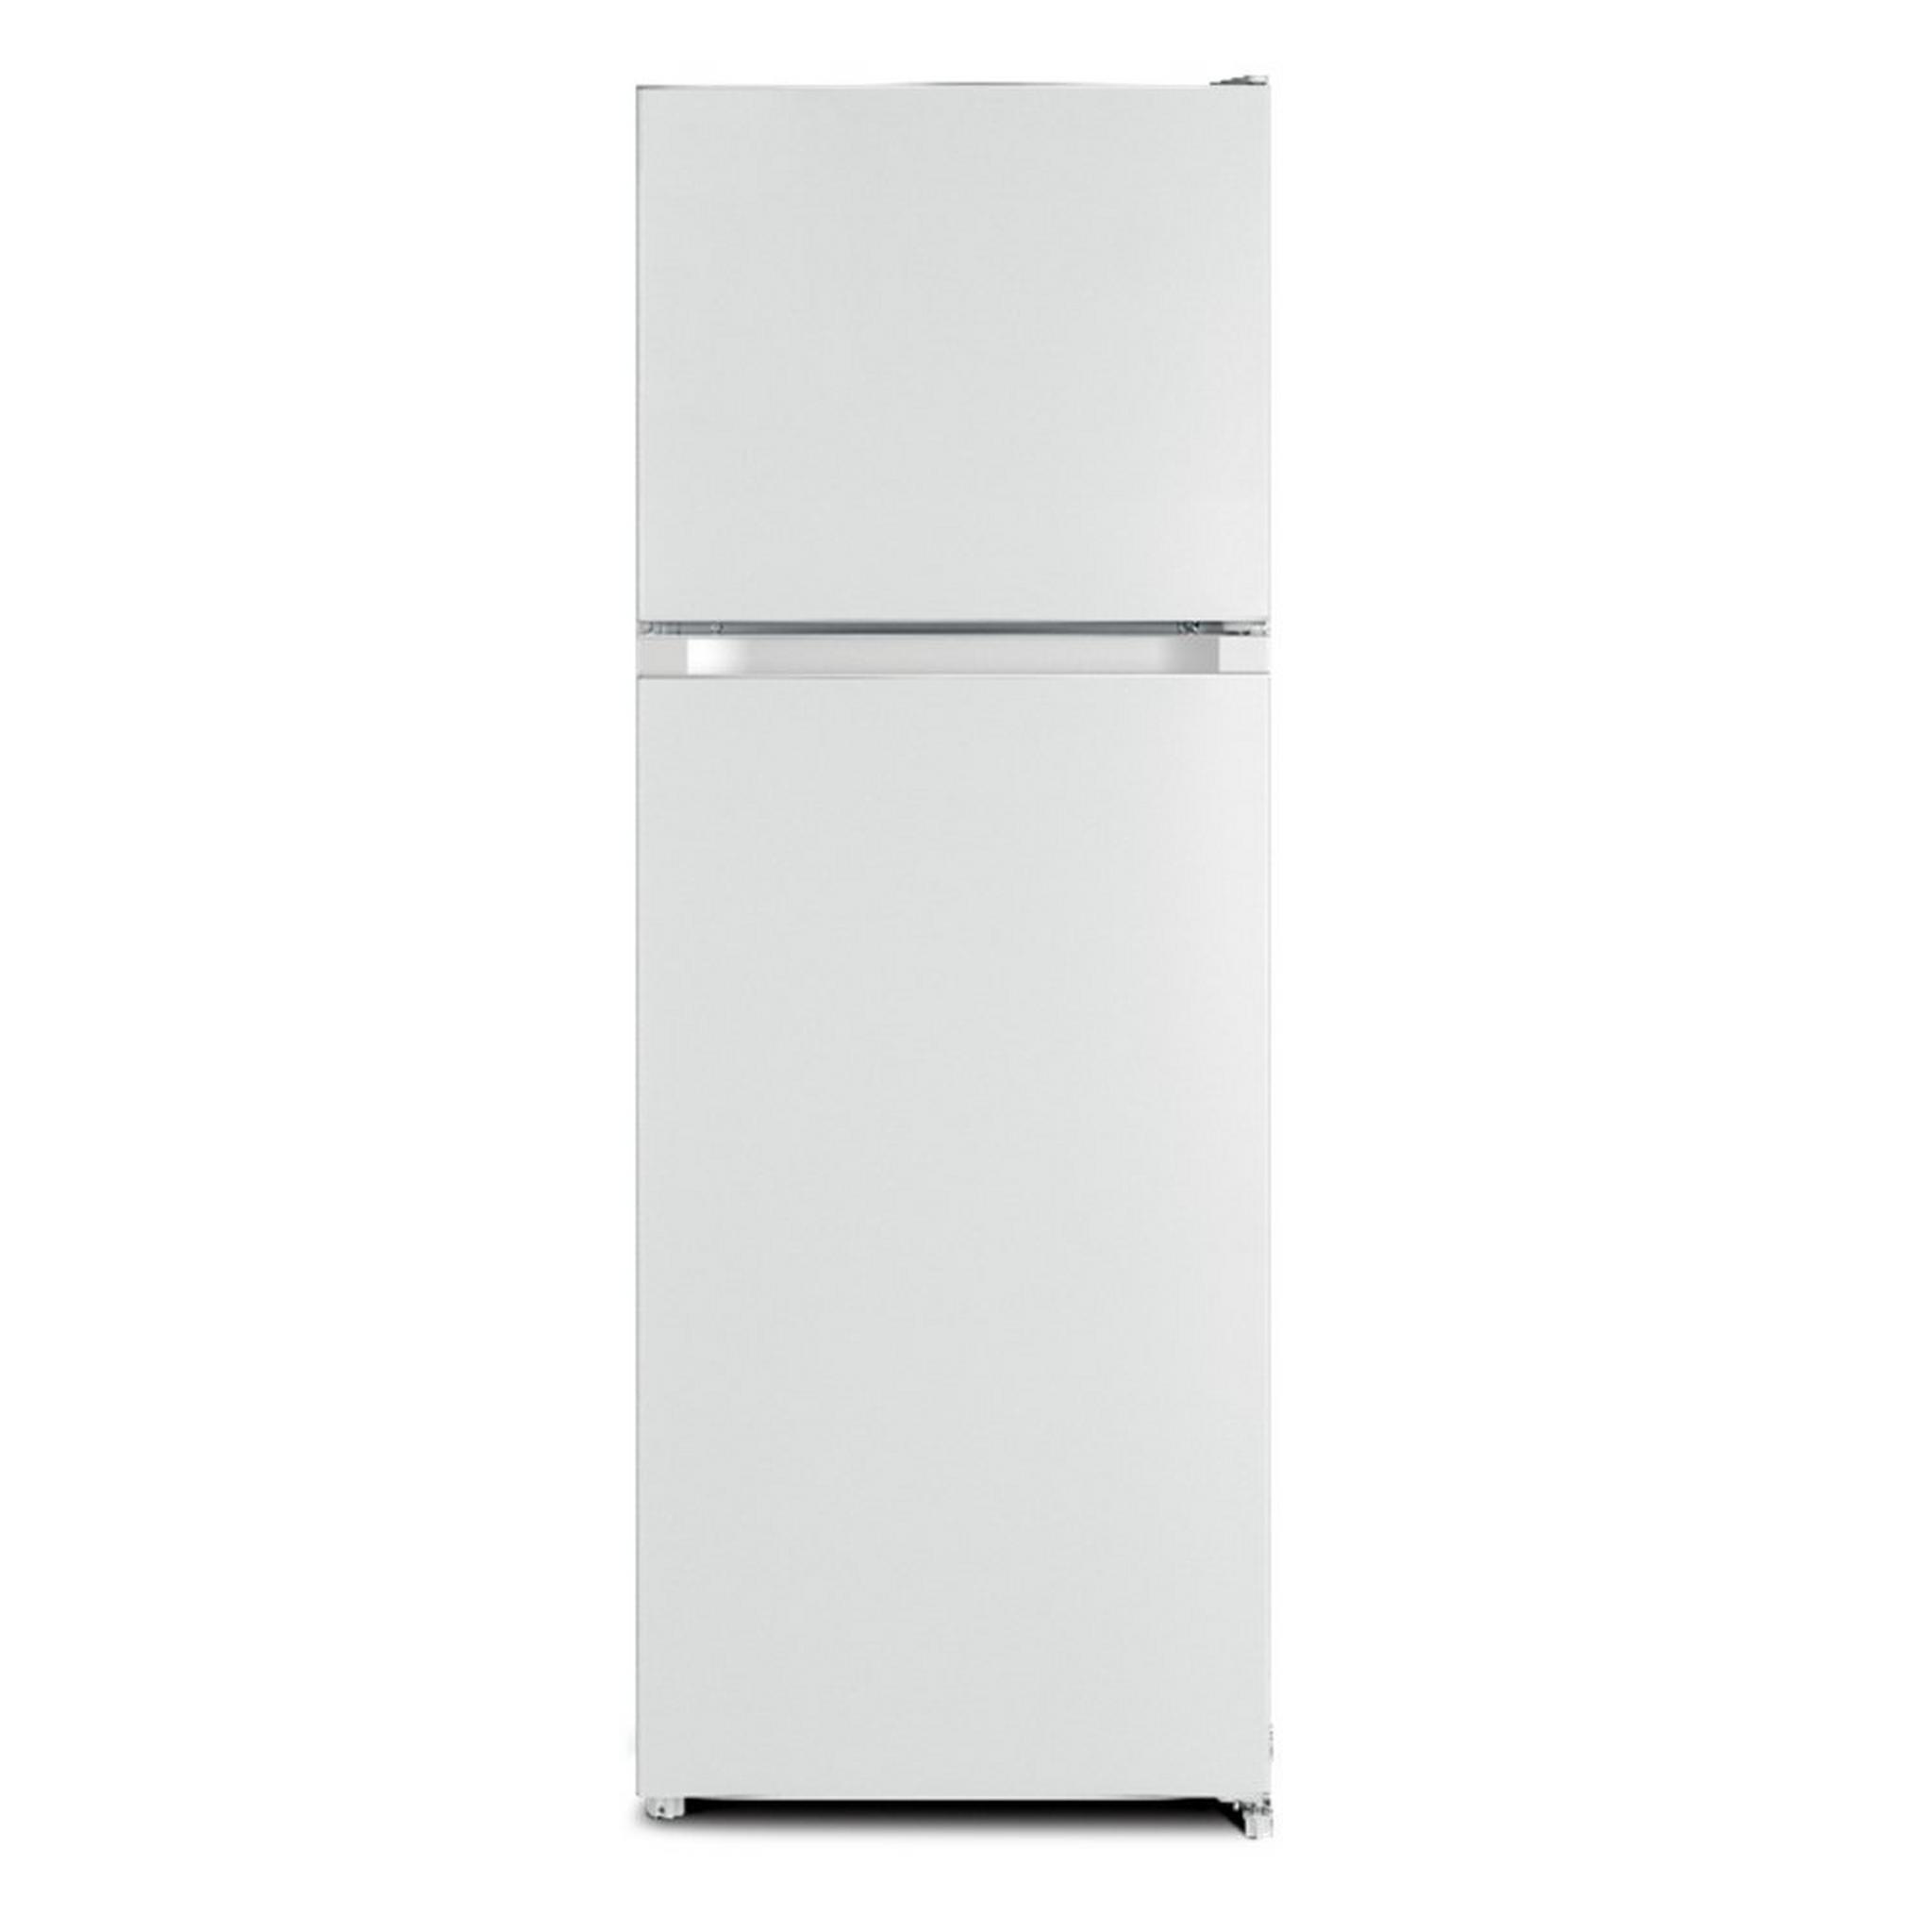 Haier 23 CFT Top Mount Refrigerator White (HRF-657WH)